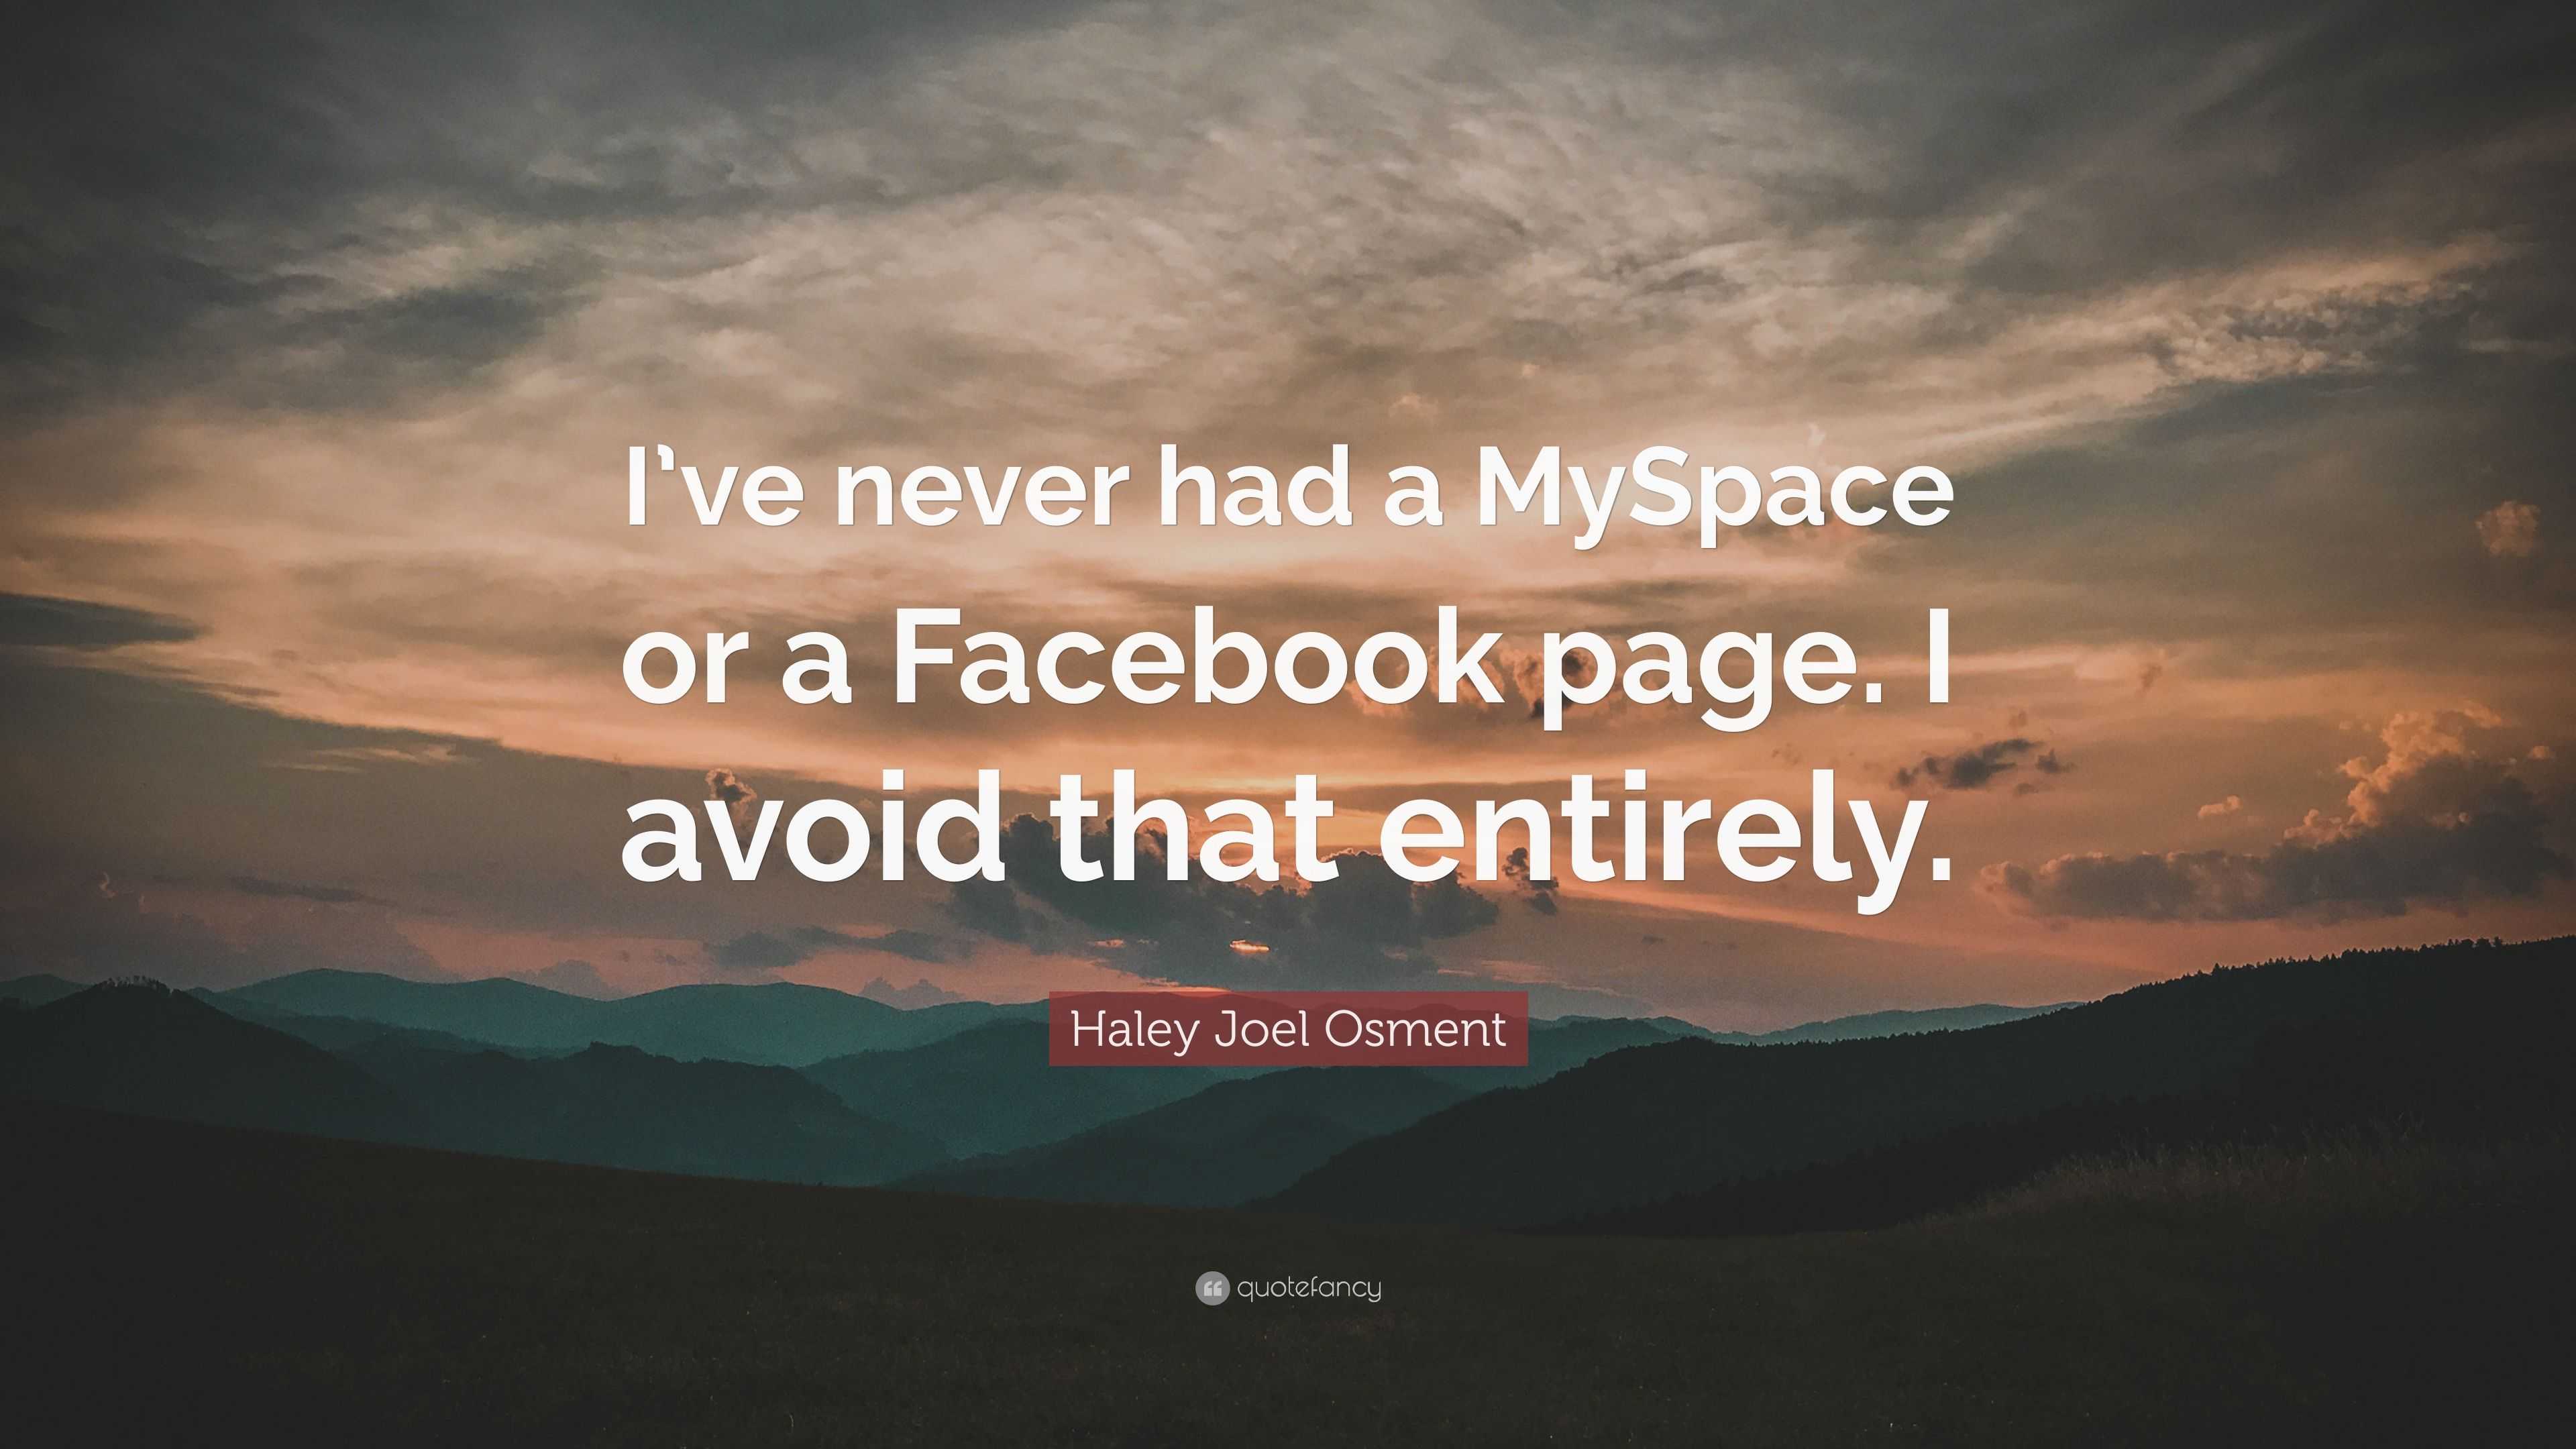 Haley Joel Osment Quote: “I’ve never had a MySpace or a Facebook page